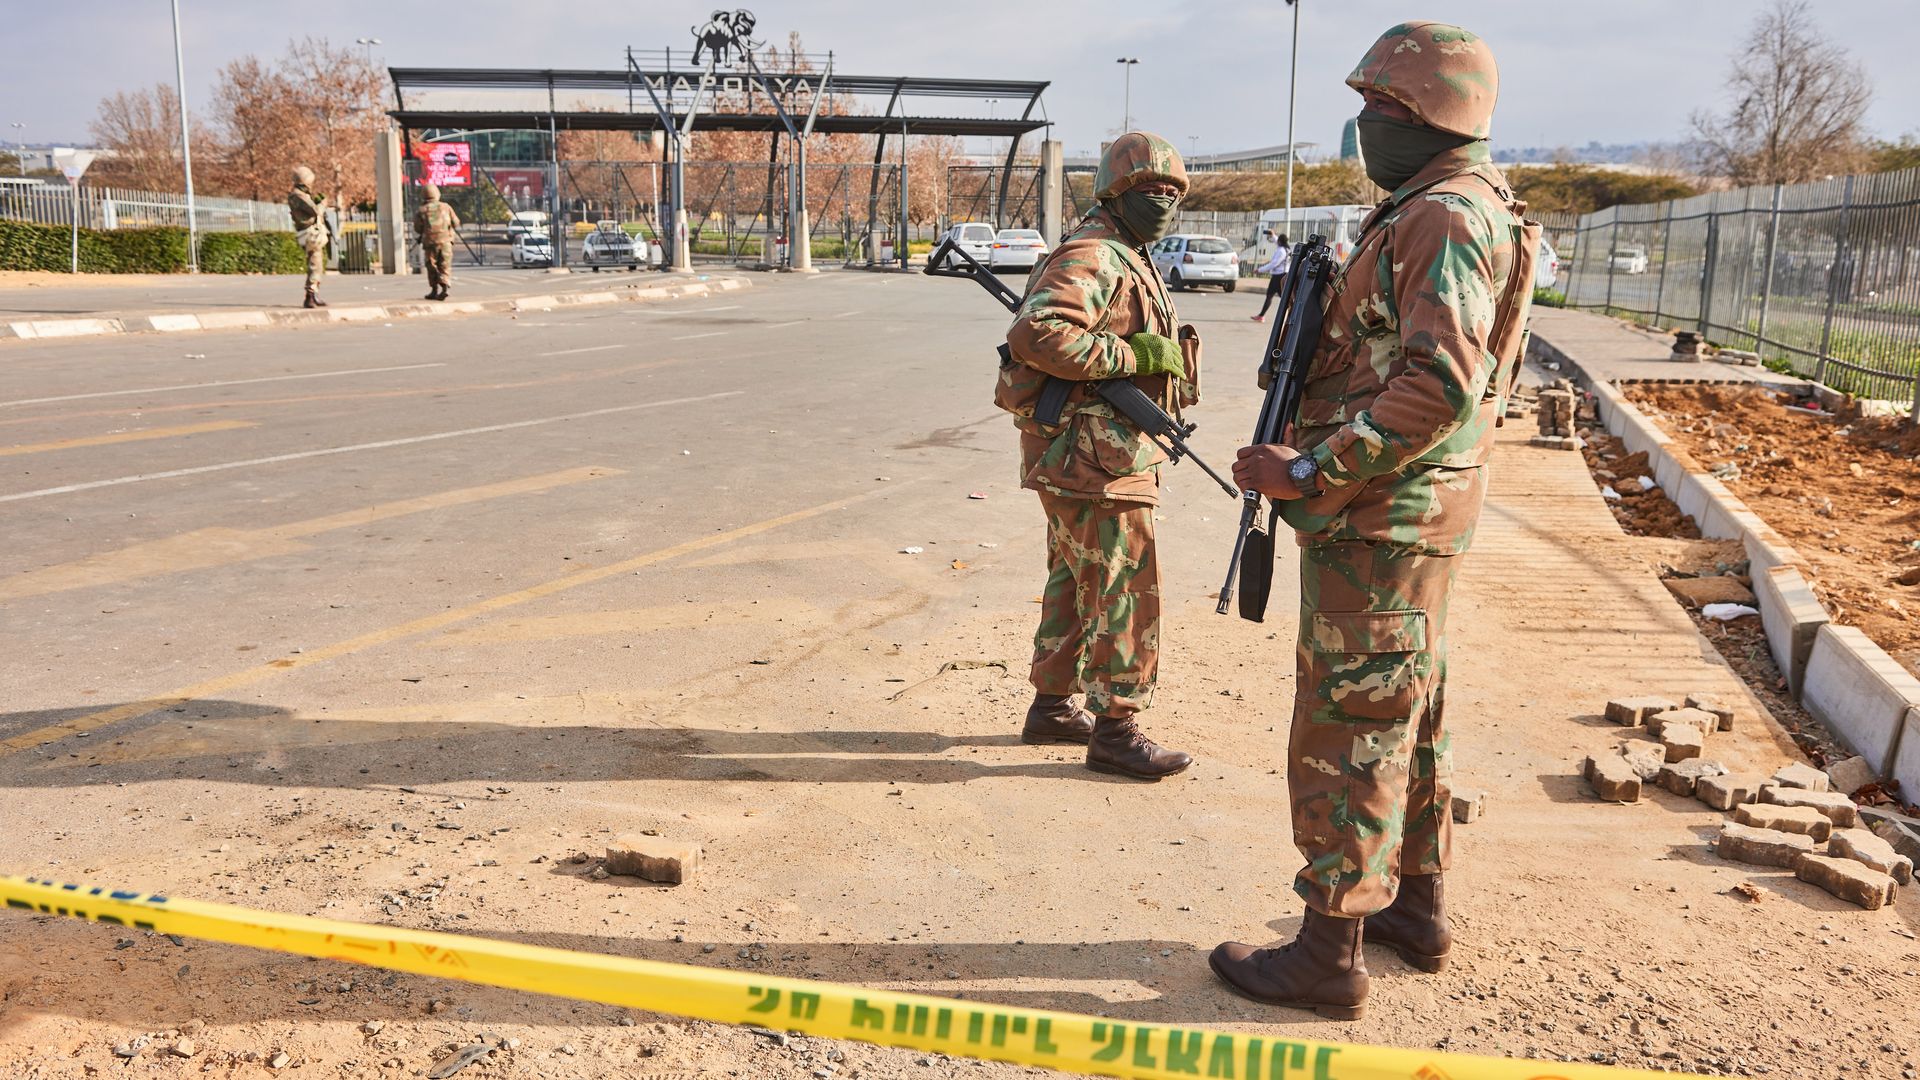 Armed soldiers from the South African National Defence Force (SANDF) patrol at the gates of Maponya Mall following rioting in the Soweto district of Johannesburg, South Africa.